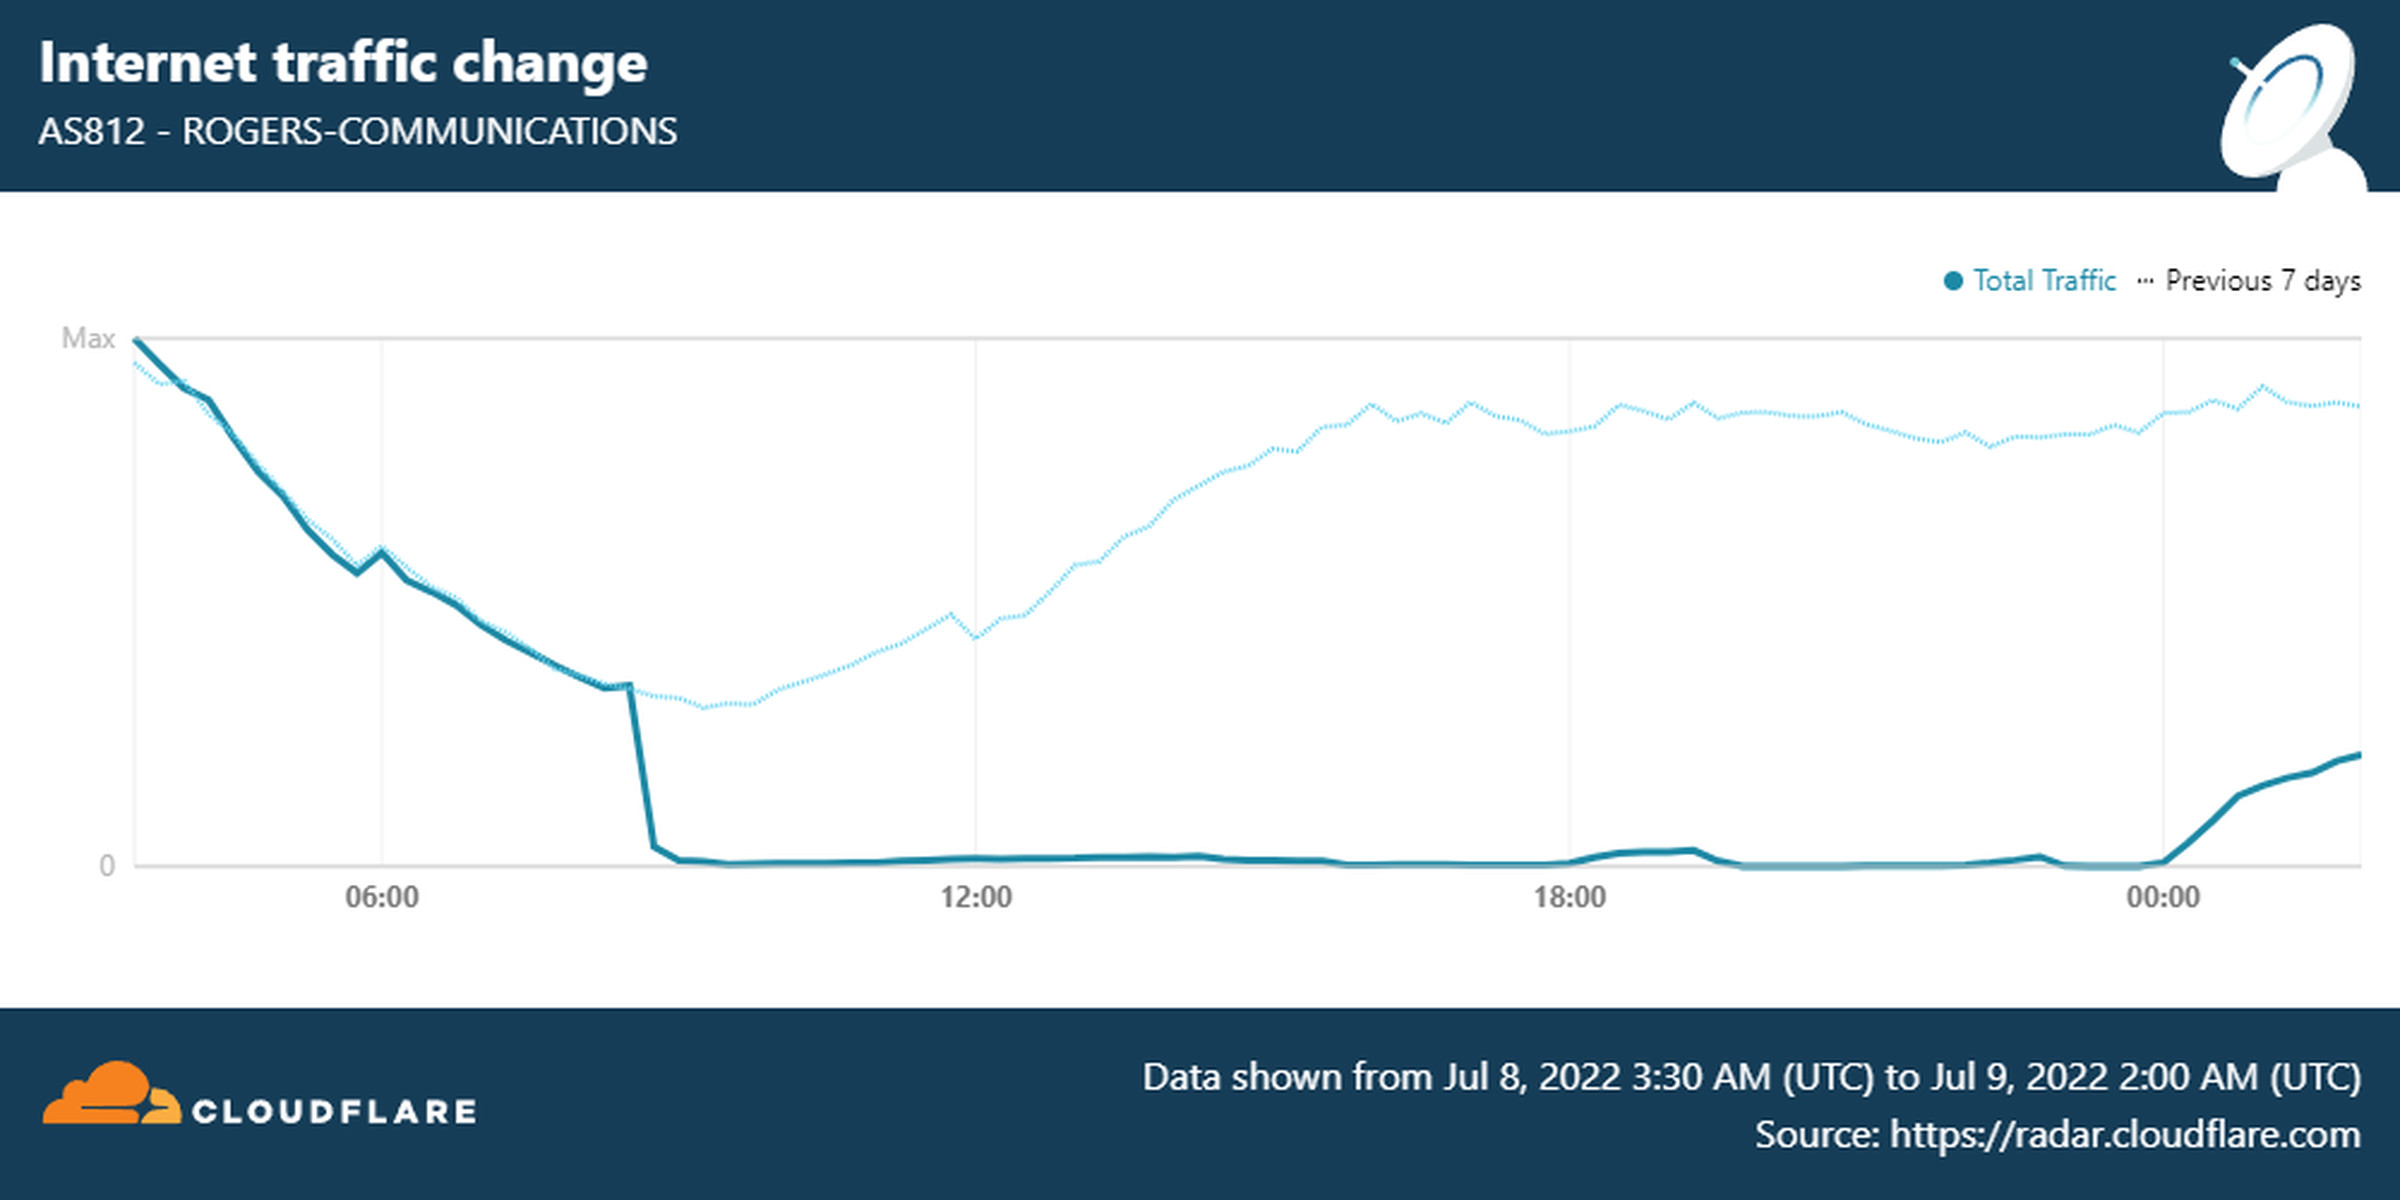 Cloudflare Radar data shows internet traffic with Rogers dropping to zero early Friday morning, then beginning to rise as services were restored in the evening.